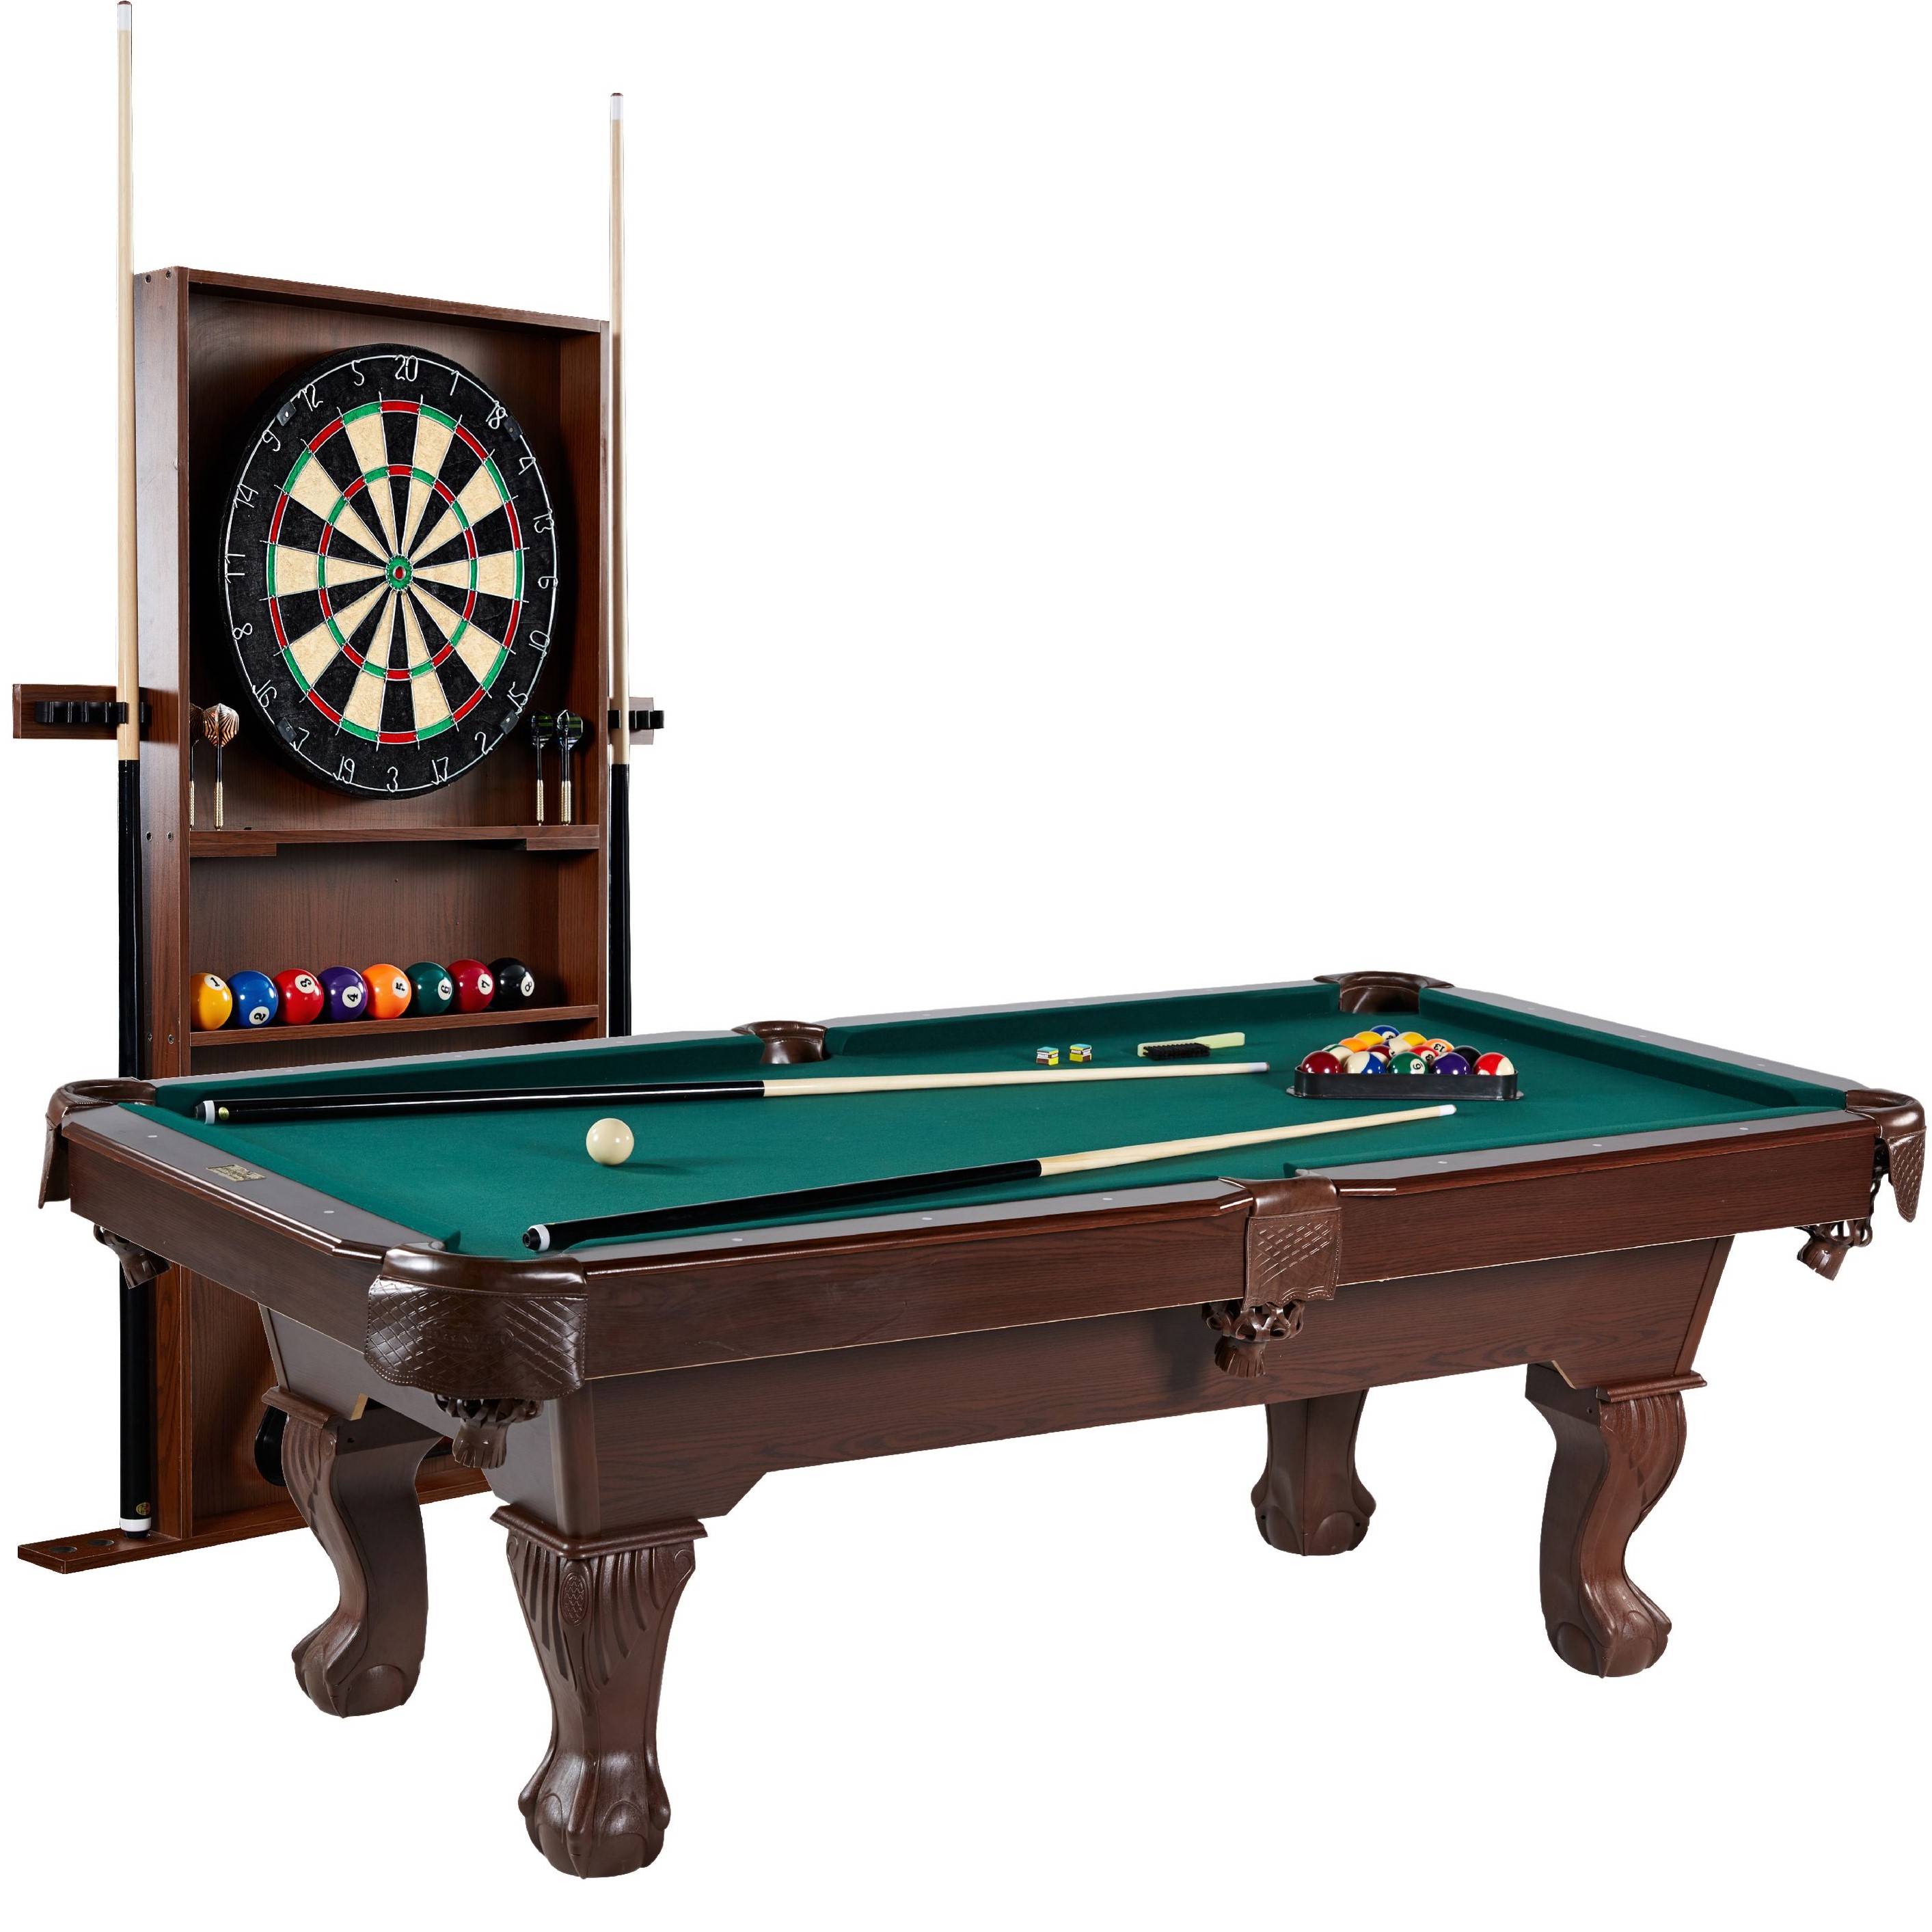 Barrington Billiards 90" Ball and Claw Leg Pool Table with Cue Rack, Dartboard Set, Green, New - image 1 of 13